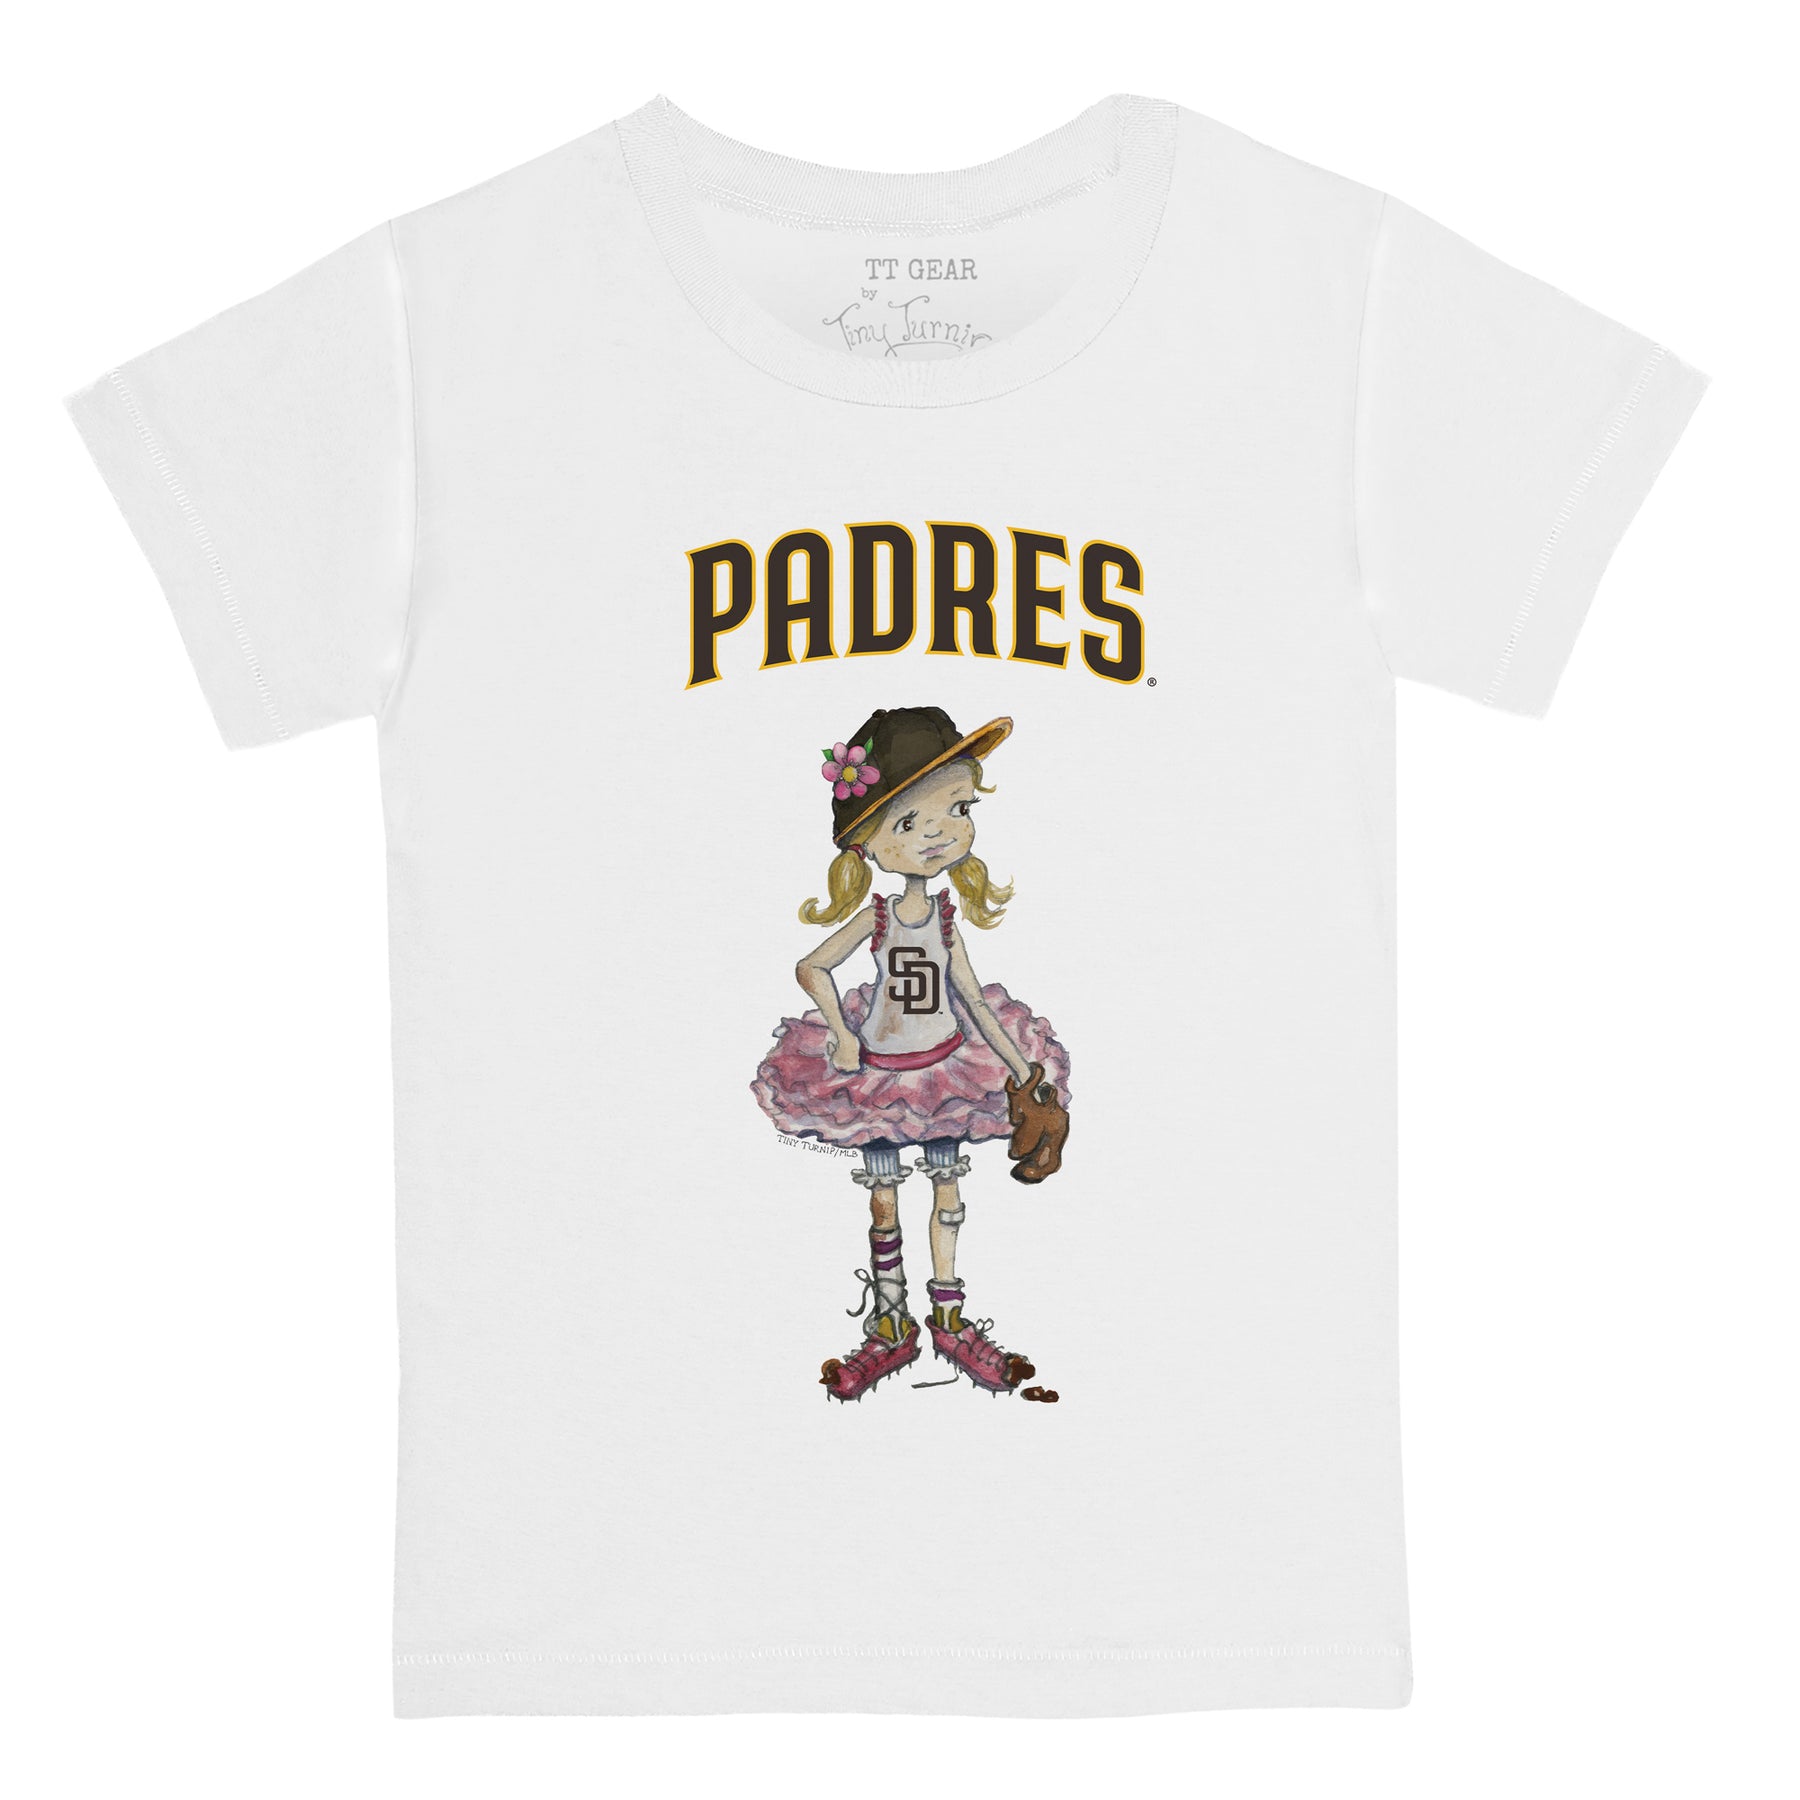 Kids San Diego Padres Gifts & Gear, Youth Padres Apparel